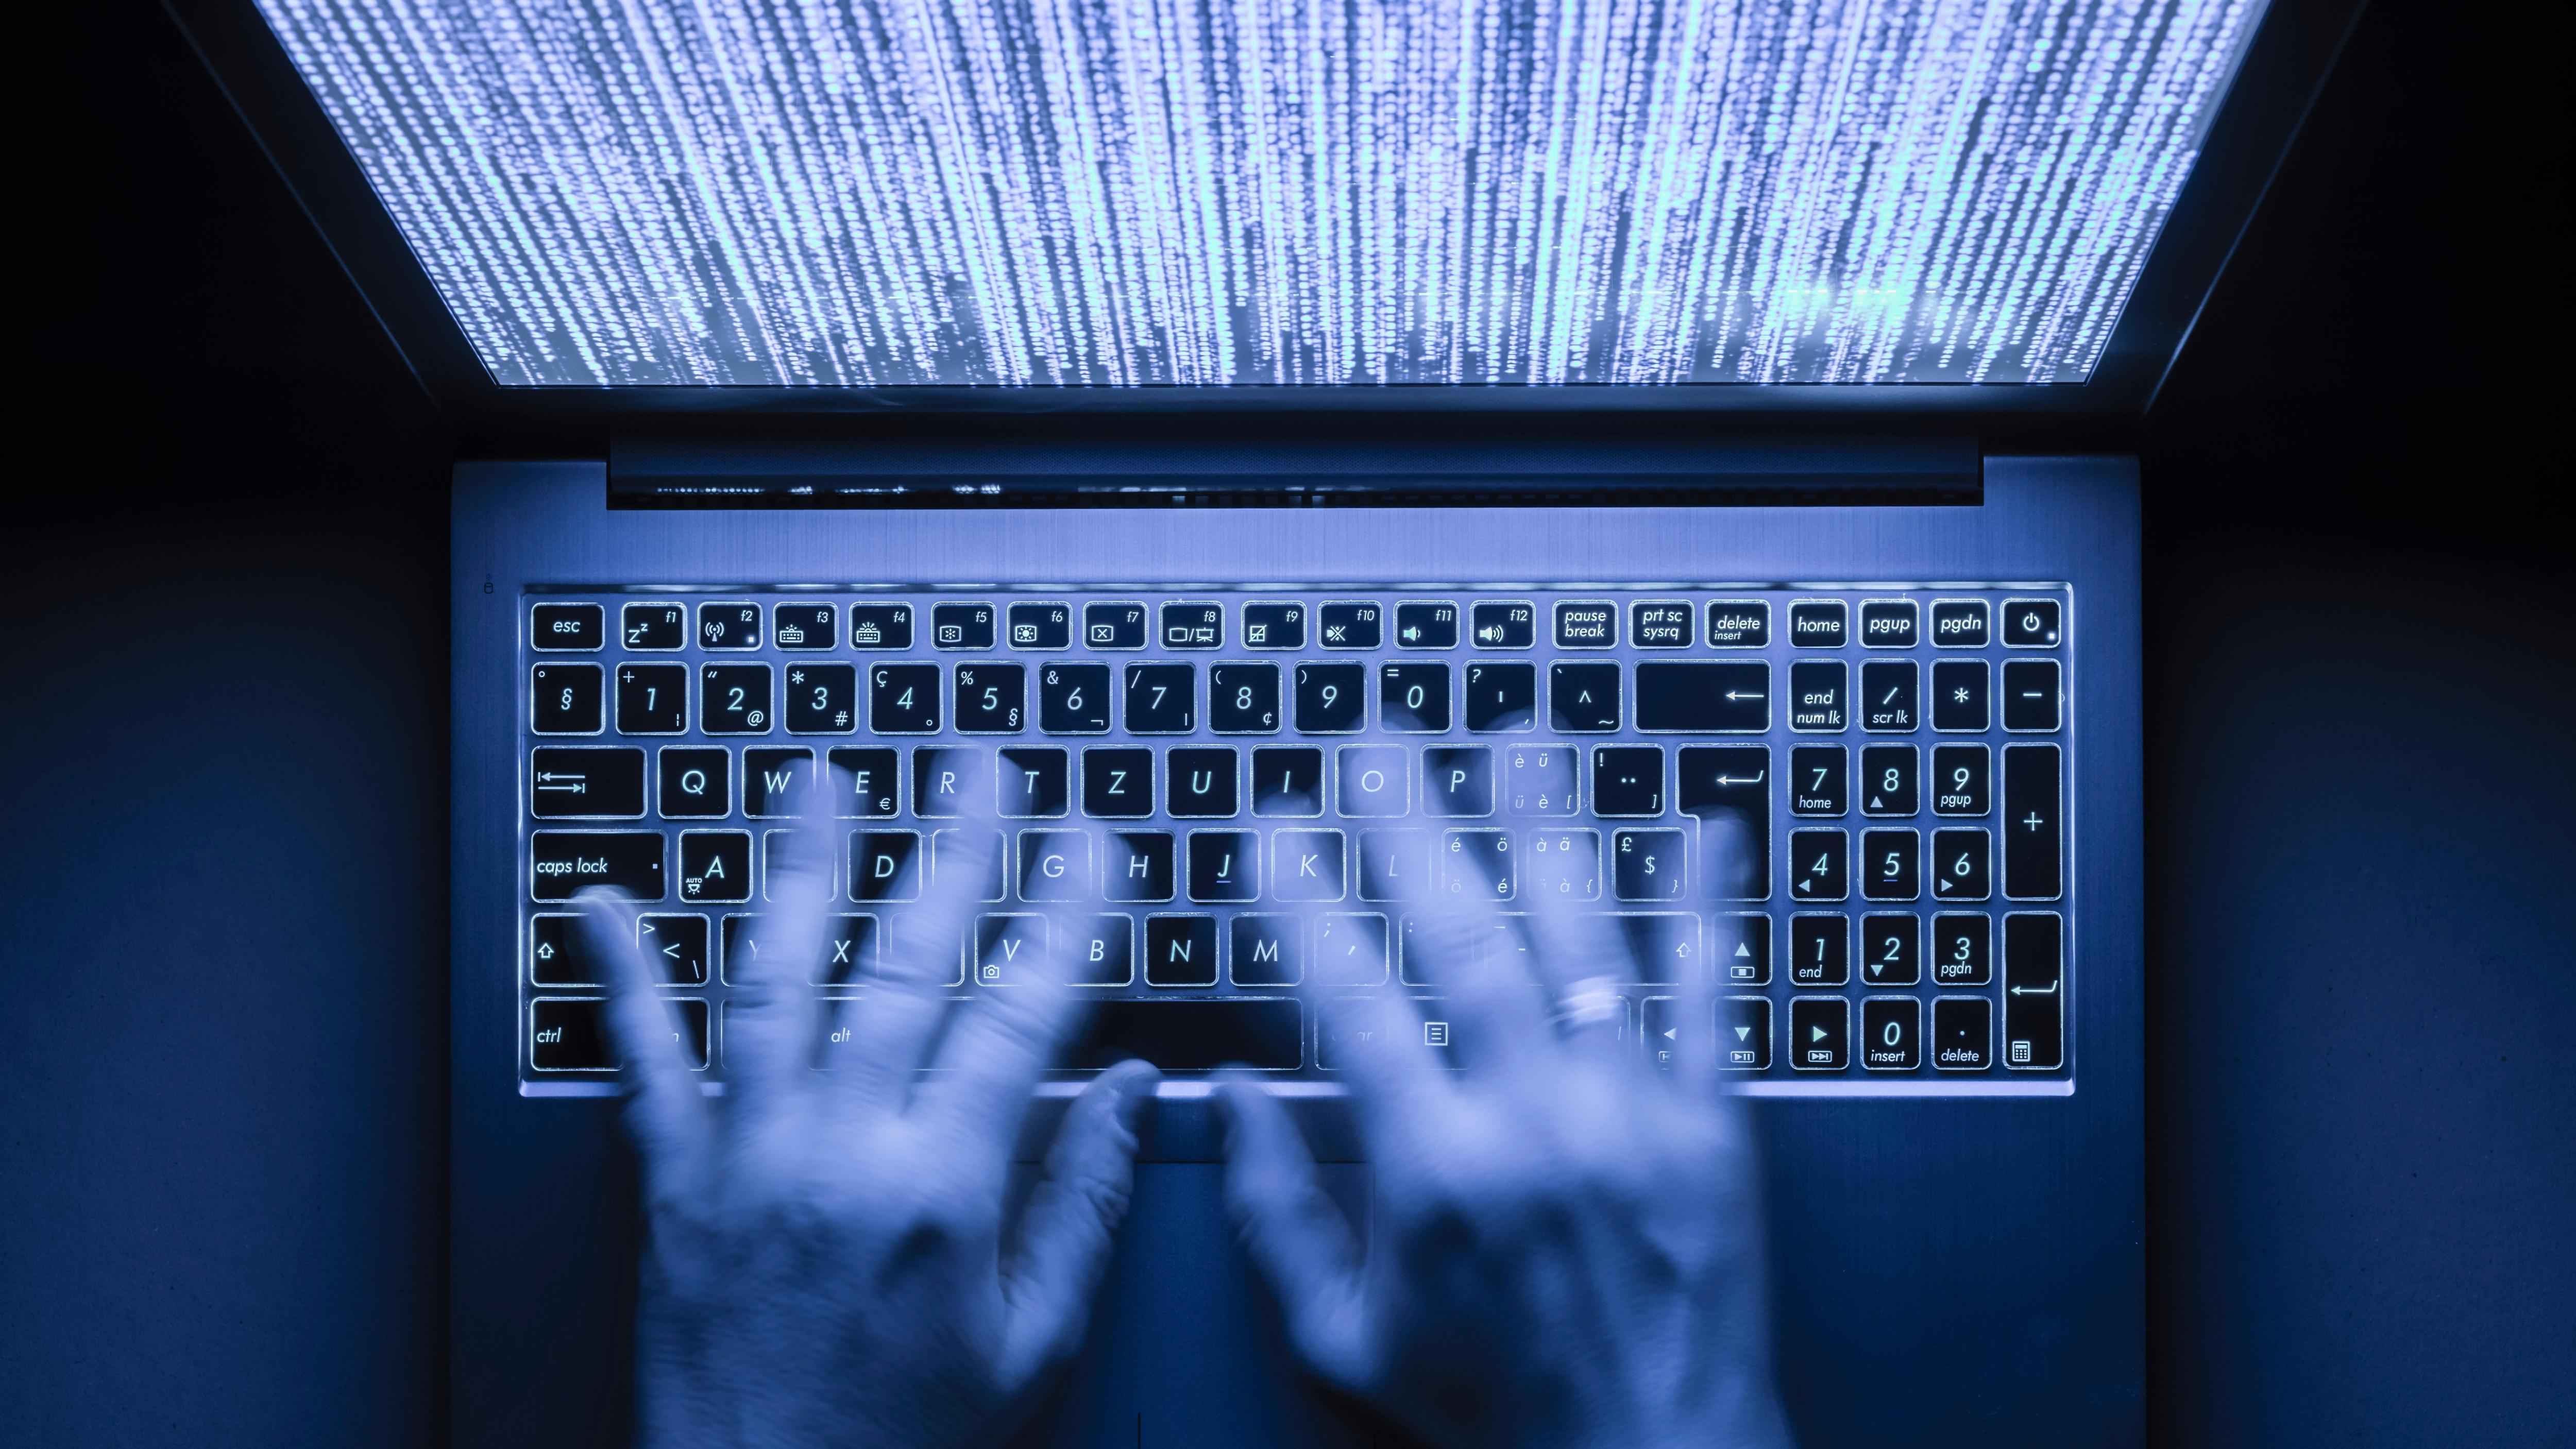 The NHS Dumfries & Galloway health board was hit by the cyberattack this month, which it said at the time had put a “significant amount” of data at risk